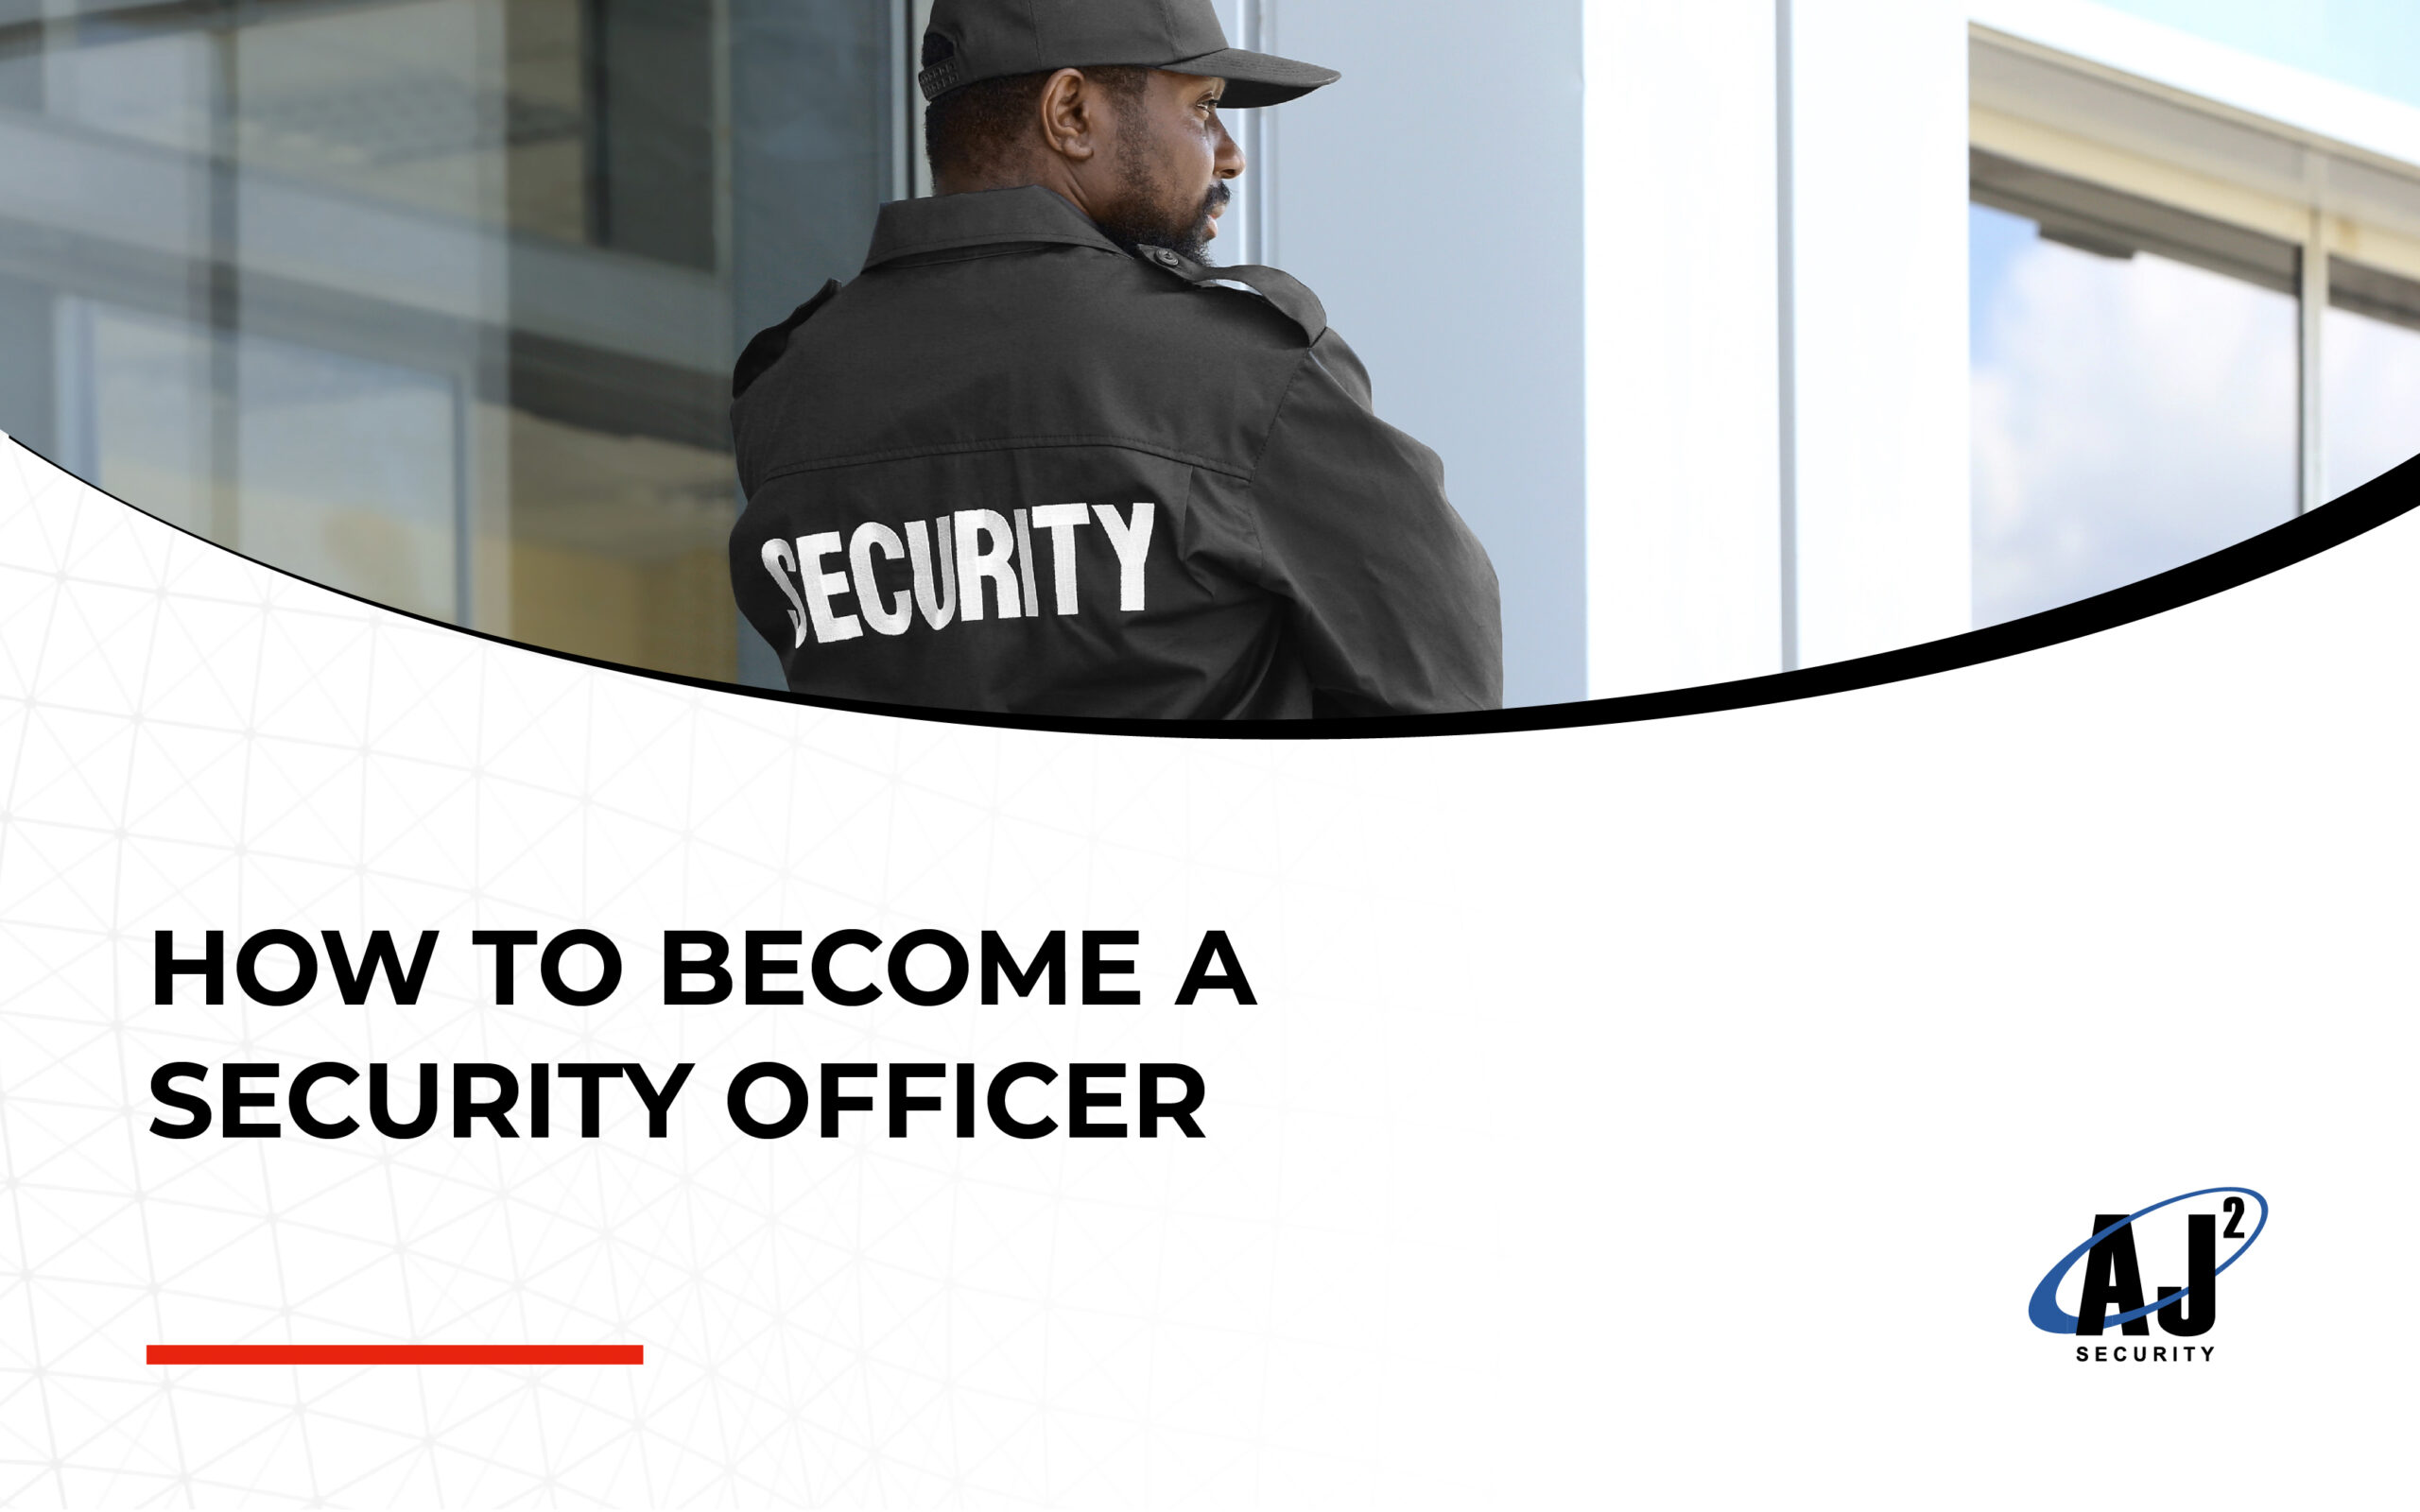 If you’ve ever wanted to know how to become a security officer with one of the industry’s leaders, you’re in the right place. Start here with AJ Squared.